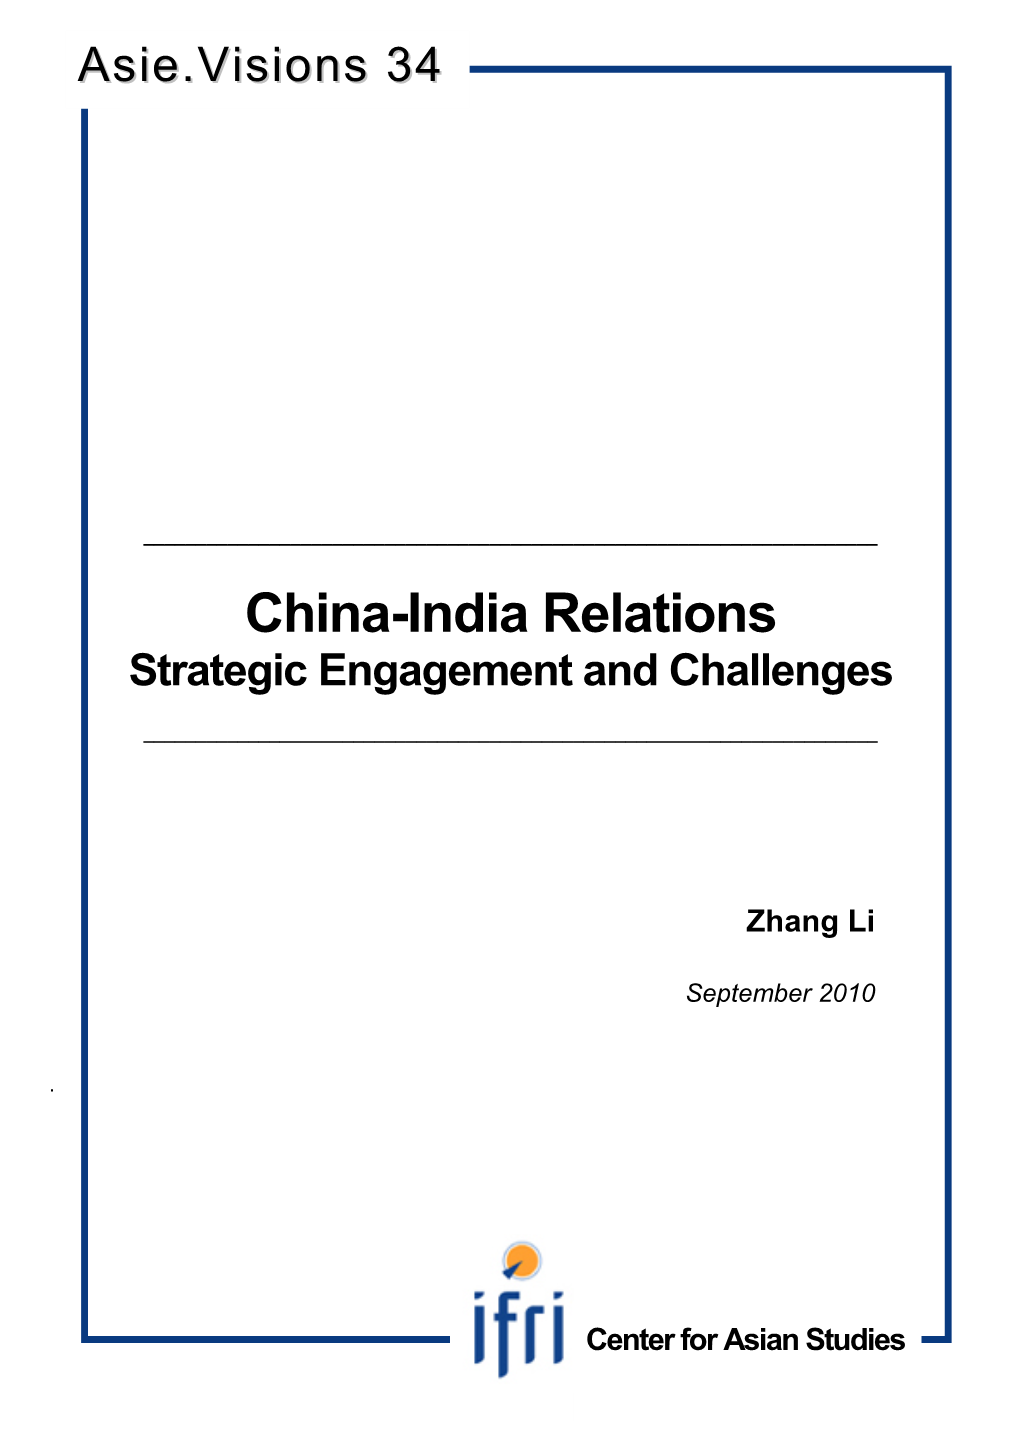 China-India Relations Strategic Engagement and Challenges